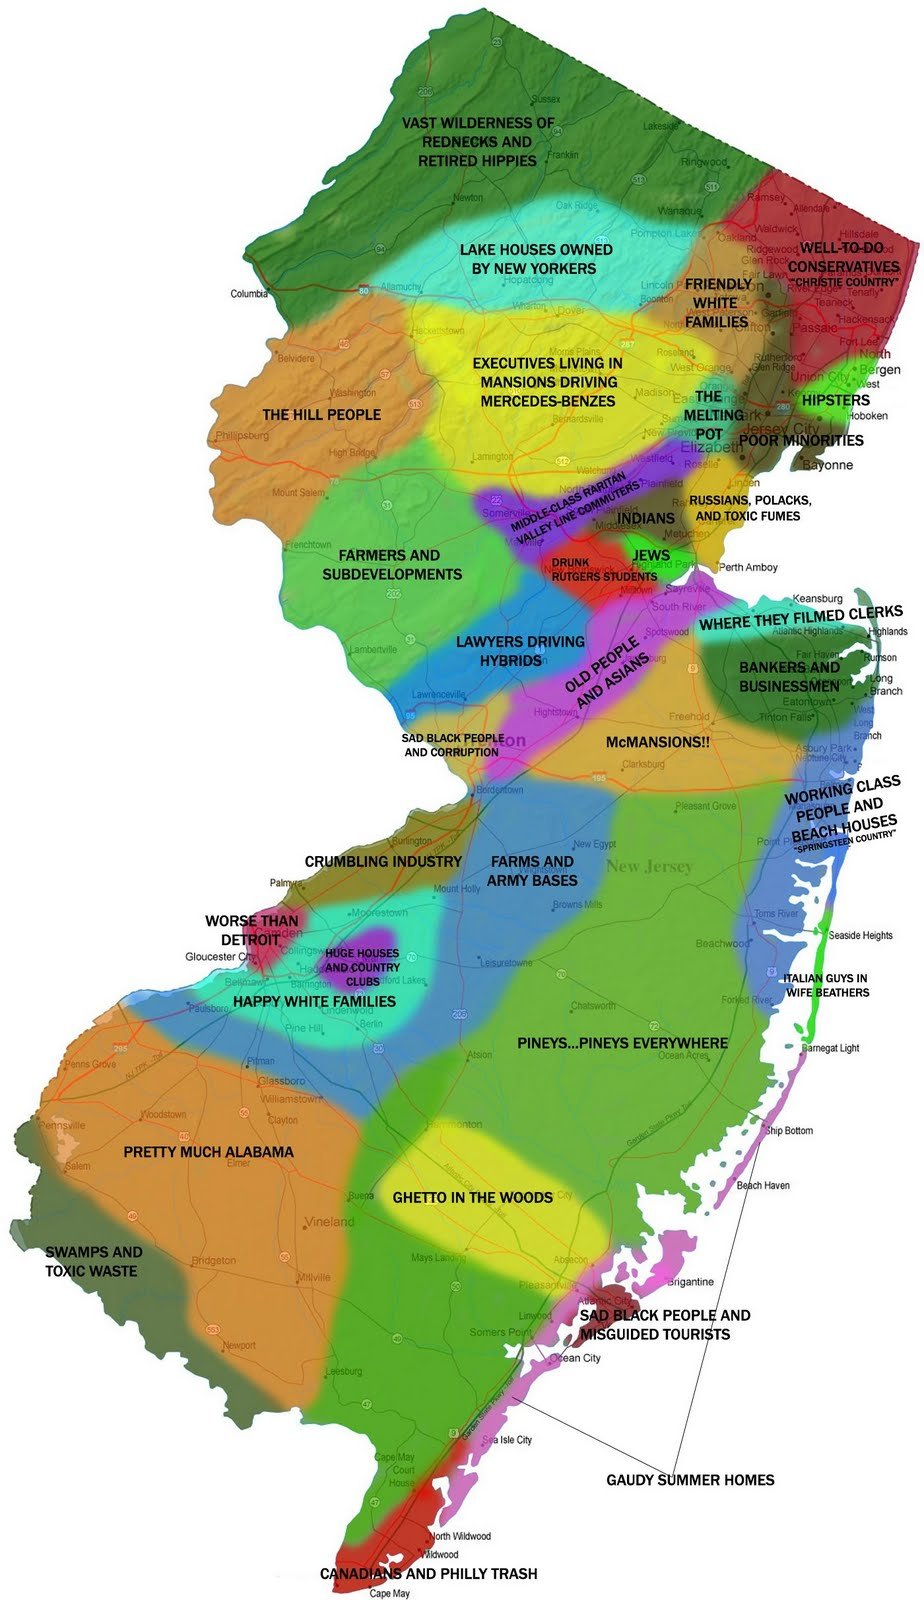 New Jersey Cultural Map, NJ, New Jersey, Regional Stereotypes, cultural and economic stereotypes, color coded map of New Jersey, Vast Wilderness of Rednecks and Retired Hippies, Well-To-Do Conservatives, Christie Country, hippies, misguided tourists, executives living in mansions, lake houses owned by new yorkers, farmers and subdevelopments, Executives living in mansions driving Mercedes-benzes, Middle-class raritan valley line commuters, Farms and army bases, Pineys ... Pineys Everywhere, Ghetto In The Woods, Sad Black People And Corruption, worse than detroit